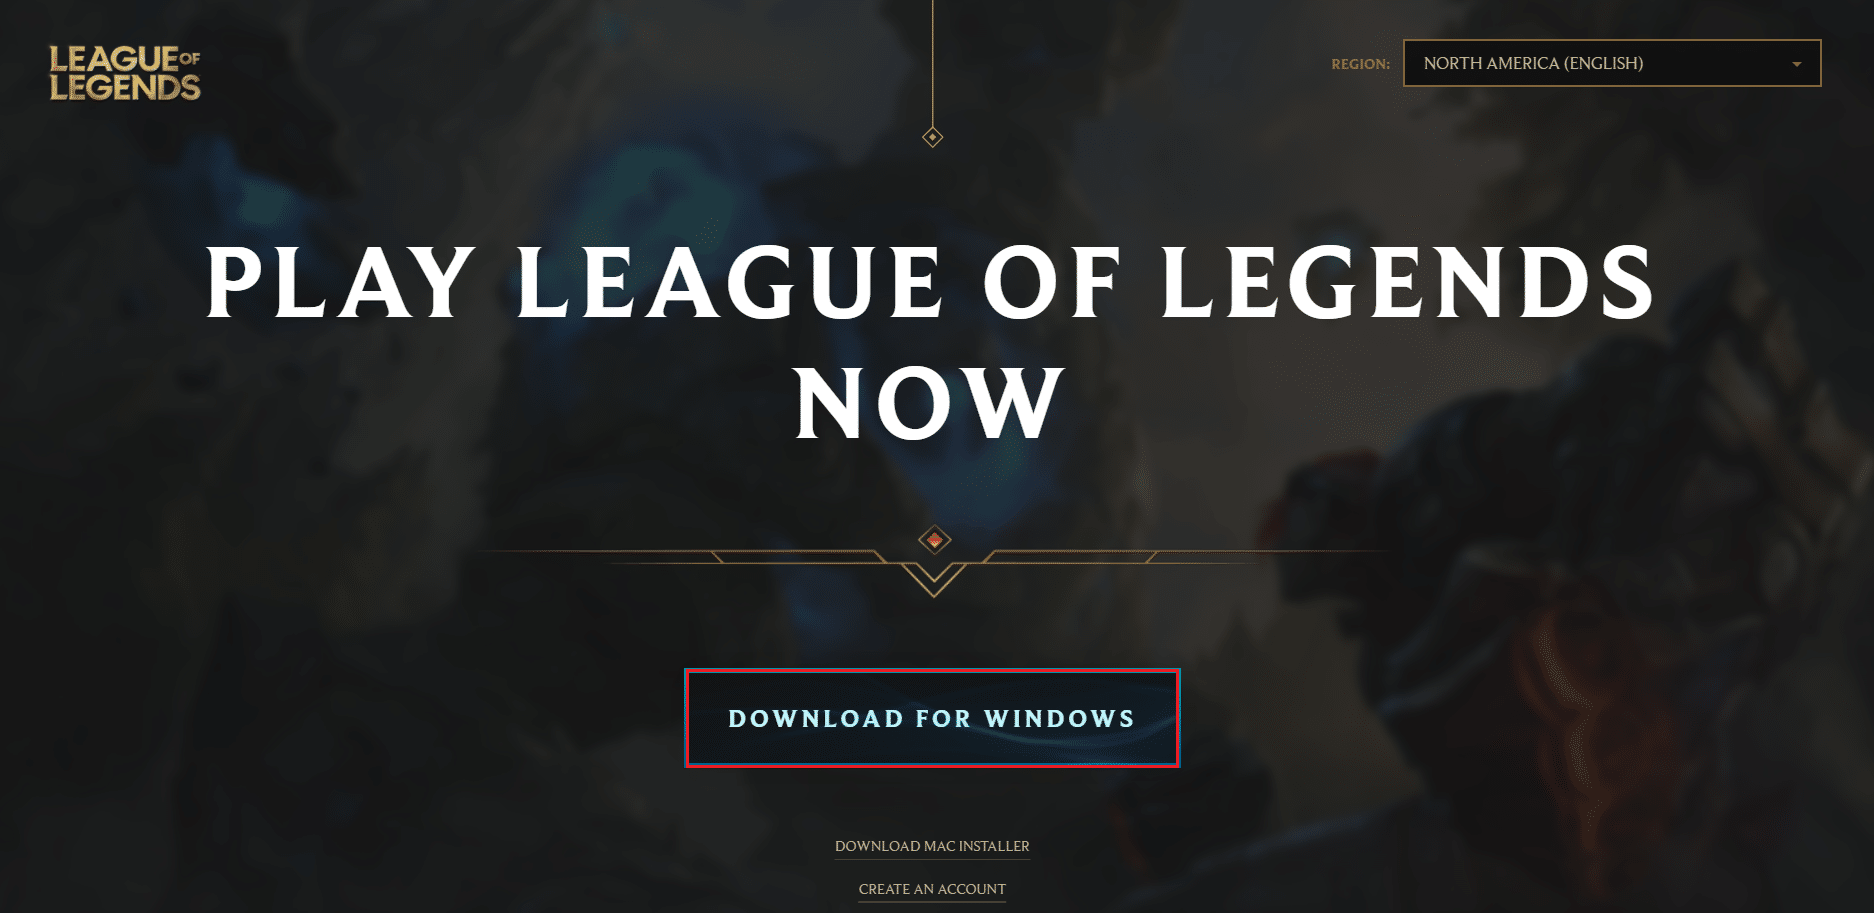 after signin up click on download for windows on league of legends download page